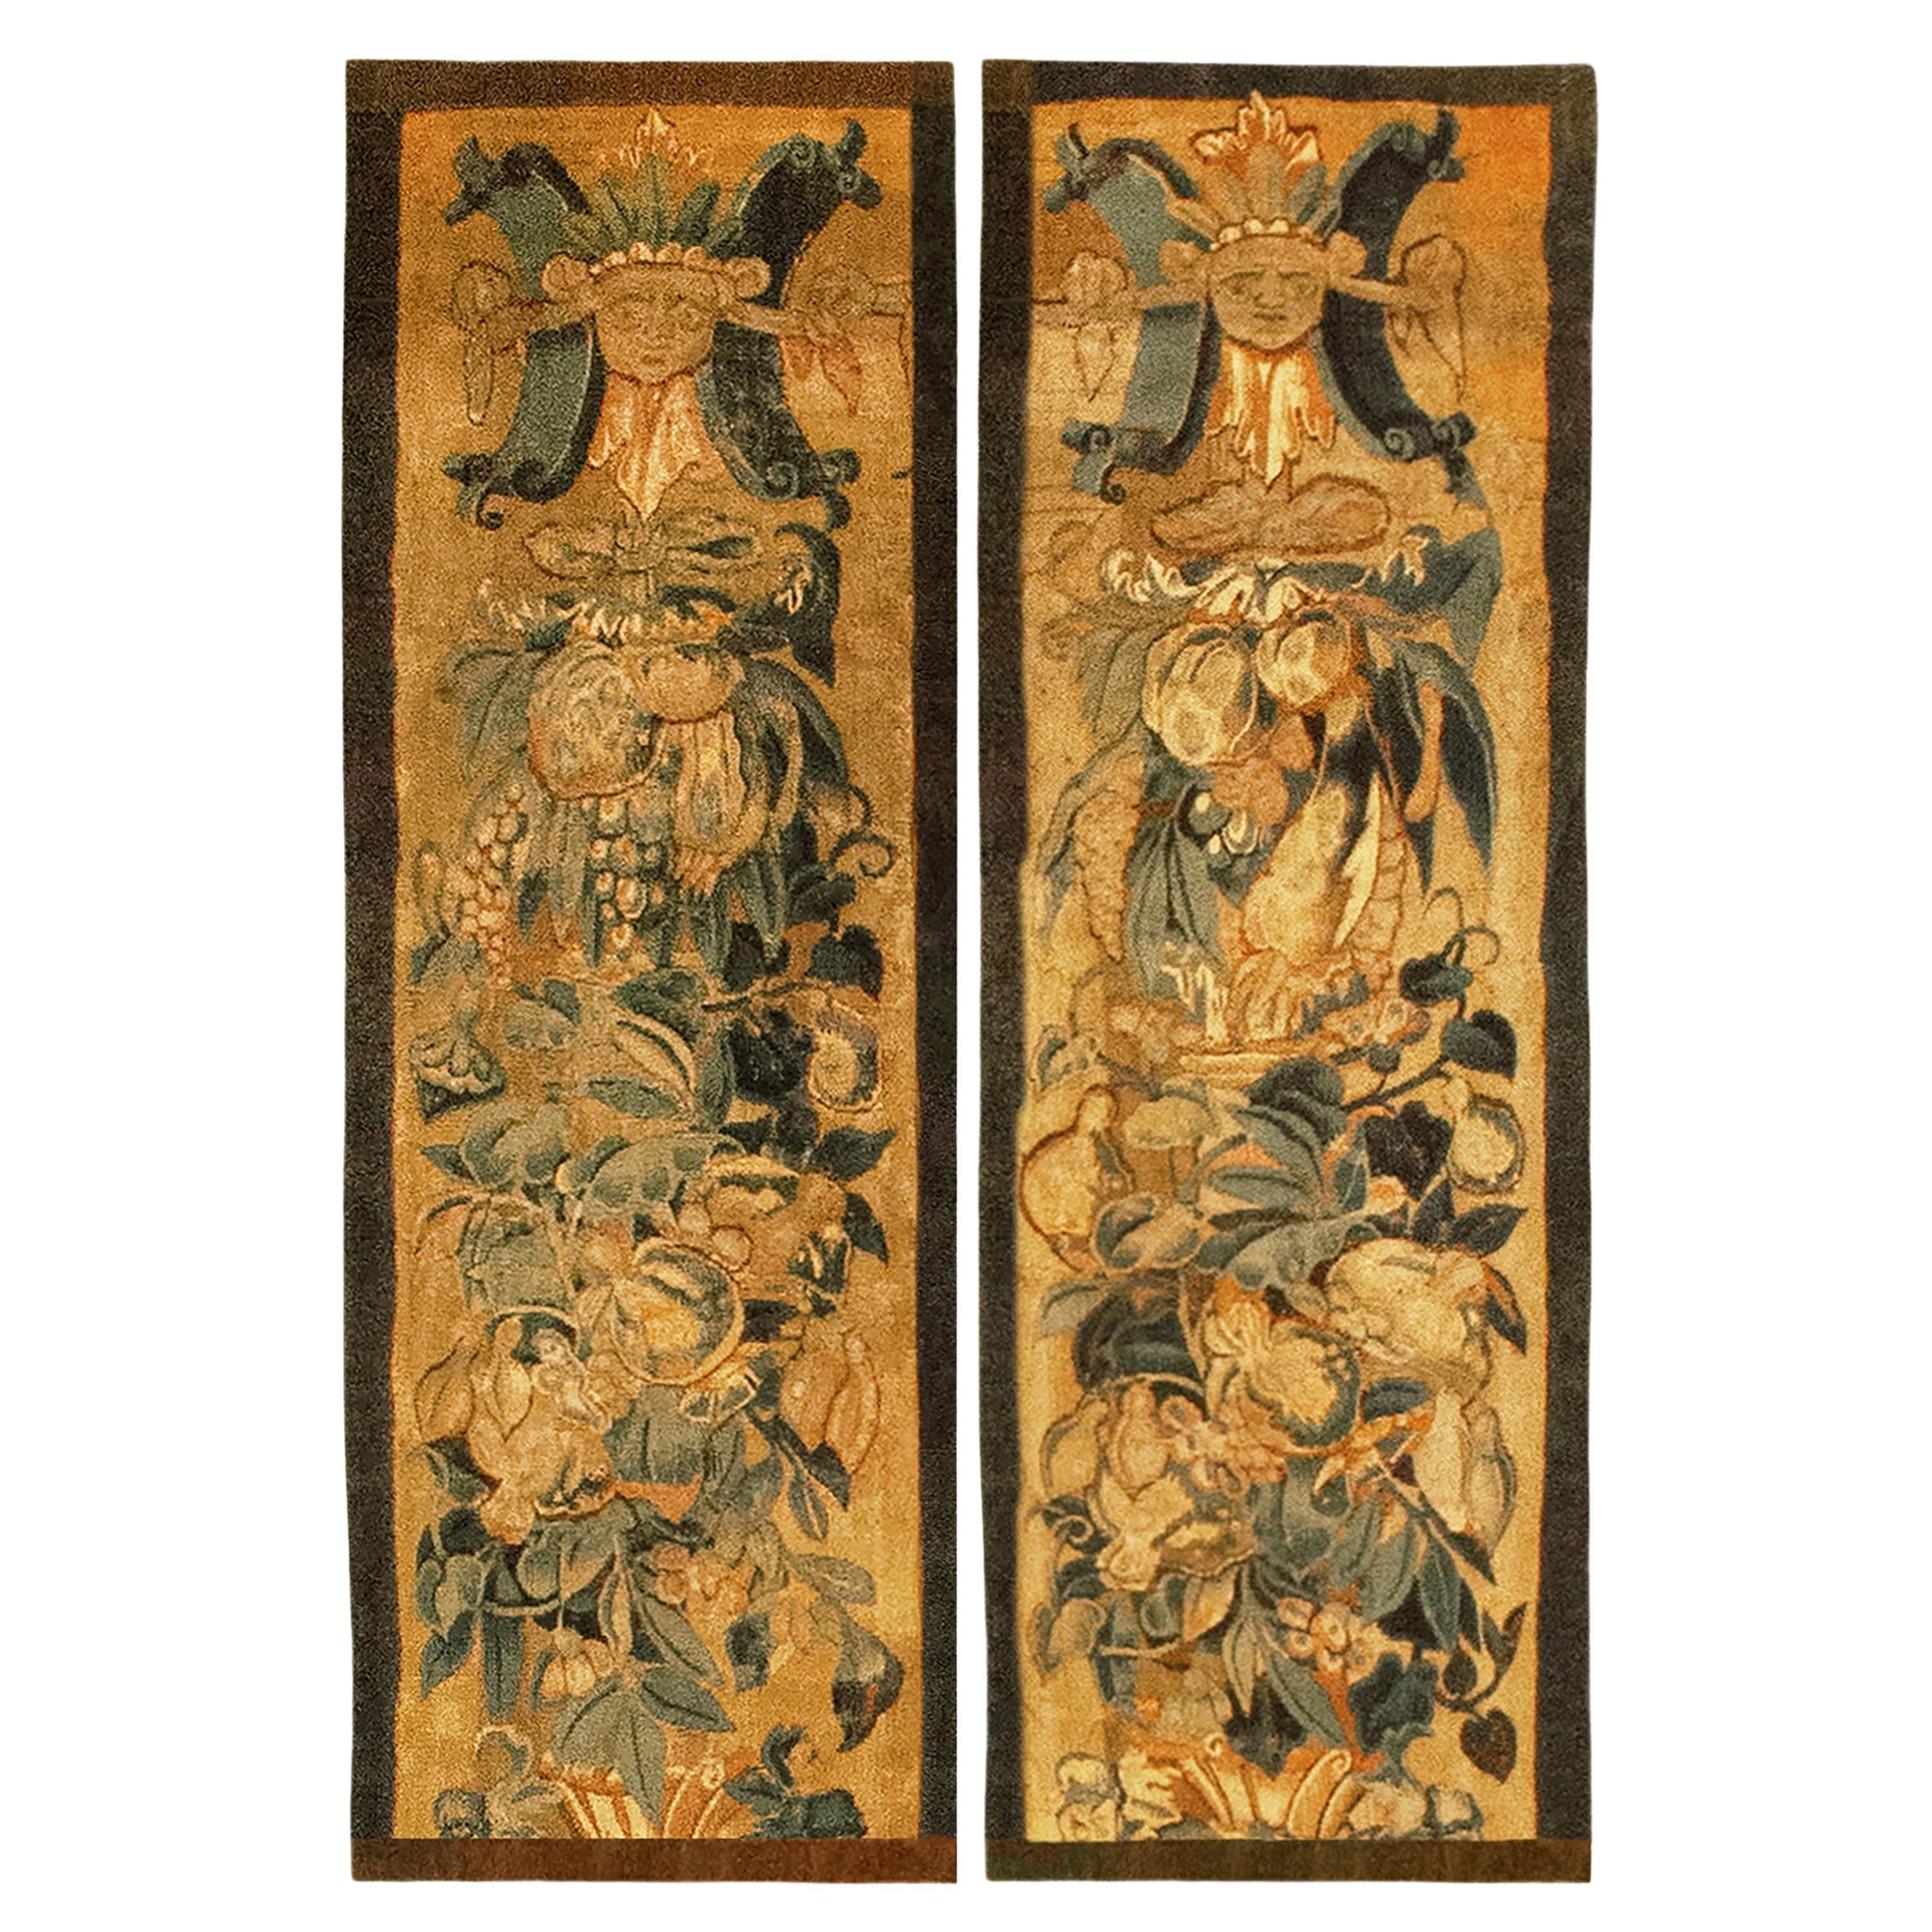 Pair of Late 16th Century Flemish Historical Tapestries, Vertically Oriented